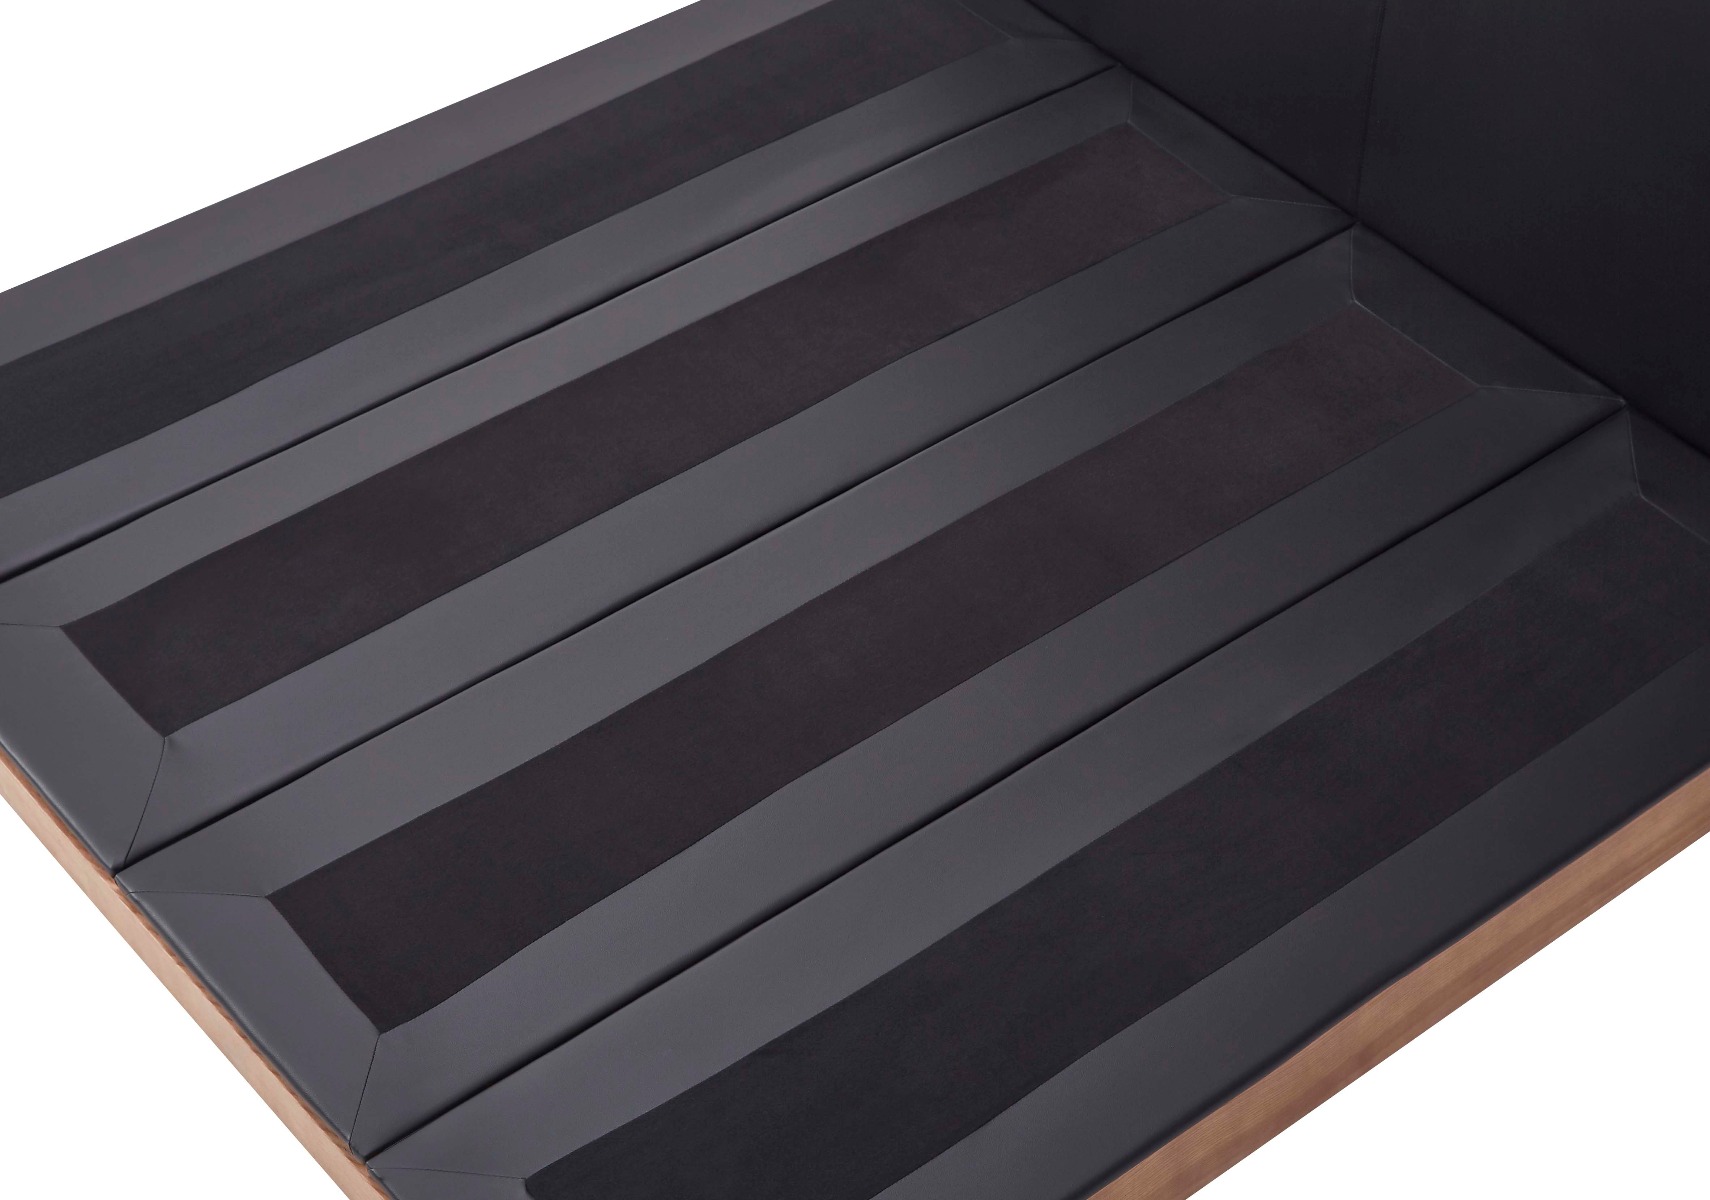 A flat base reduces sinking or sagging from your mattress.